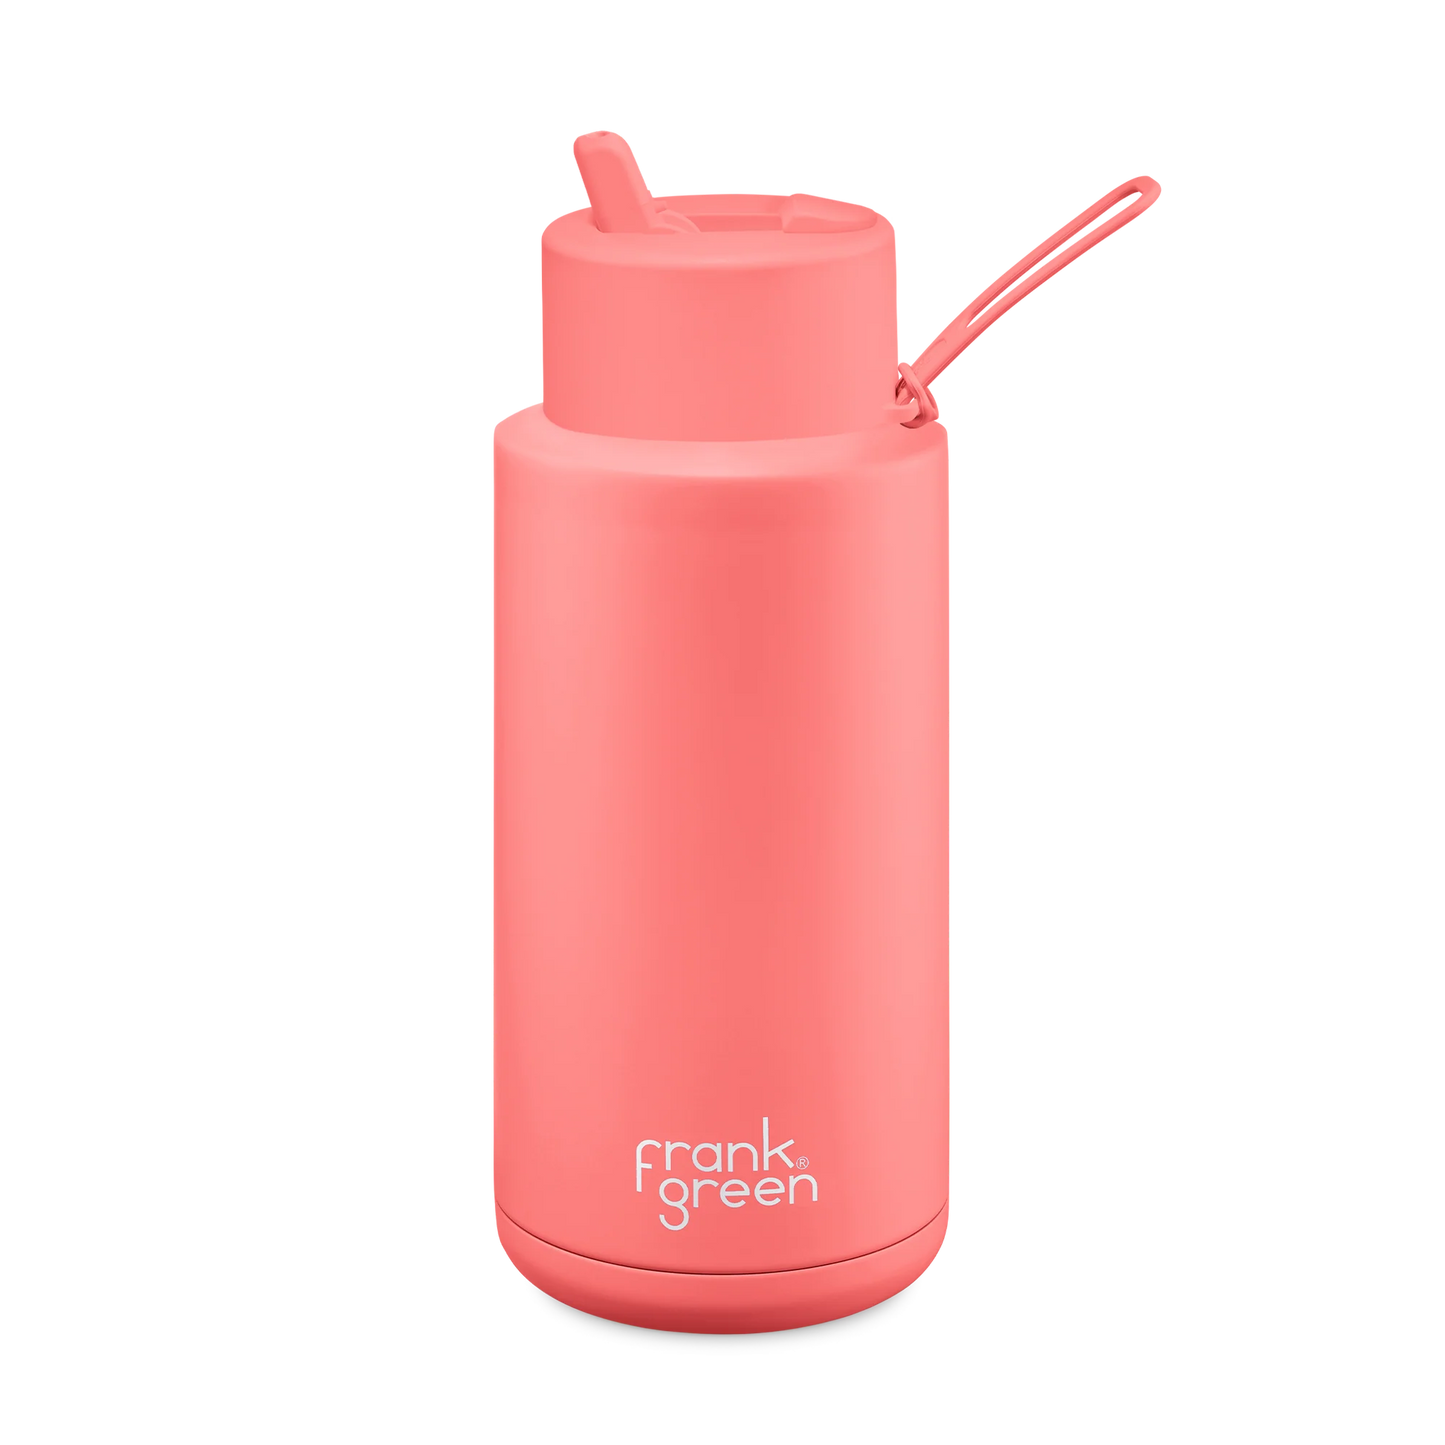 LIMITED EDITION CERAMIC REUSABLE BOTTLE (1L) - SWEET PEACH